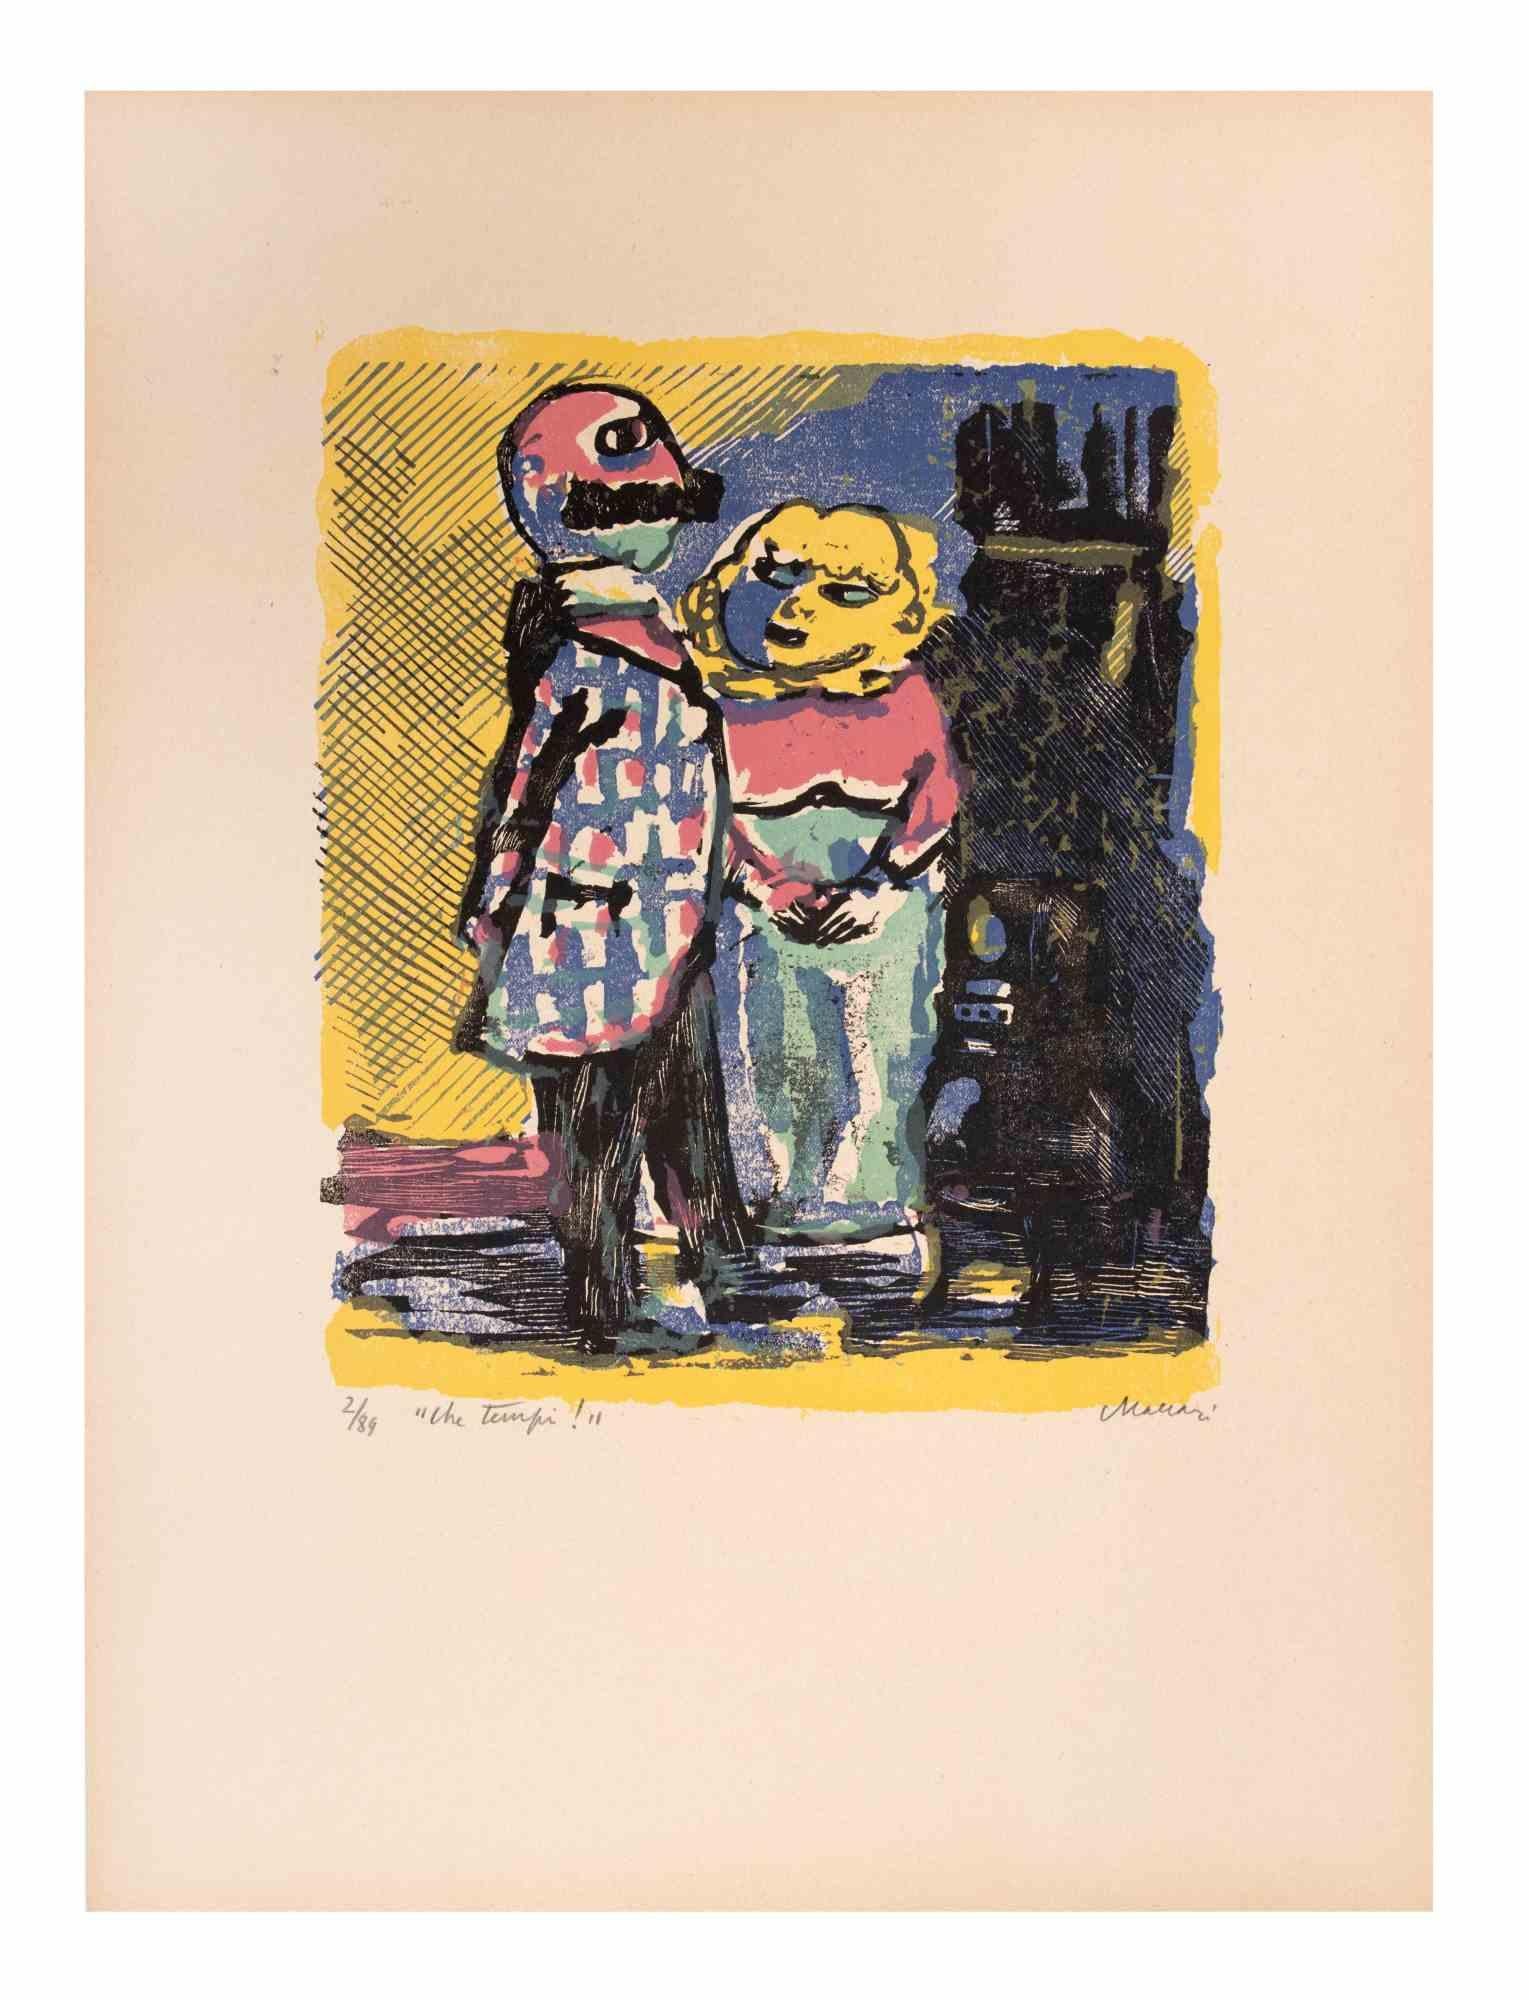 Those Were The Days! (Che tempi!) is an Artwork realized by Mino Maccari  (1924-1989) in the Mid-20th Century.

Colored woodcut on paper. Hand-signed on the lower, numbered 1/89 specimens and titled on the left margin.

Good conditions.

Mino